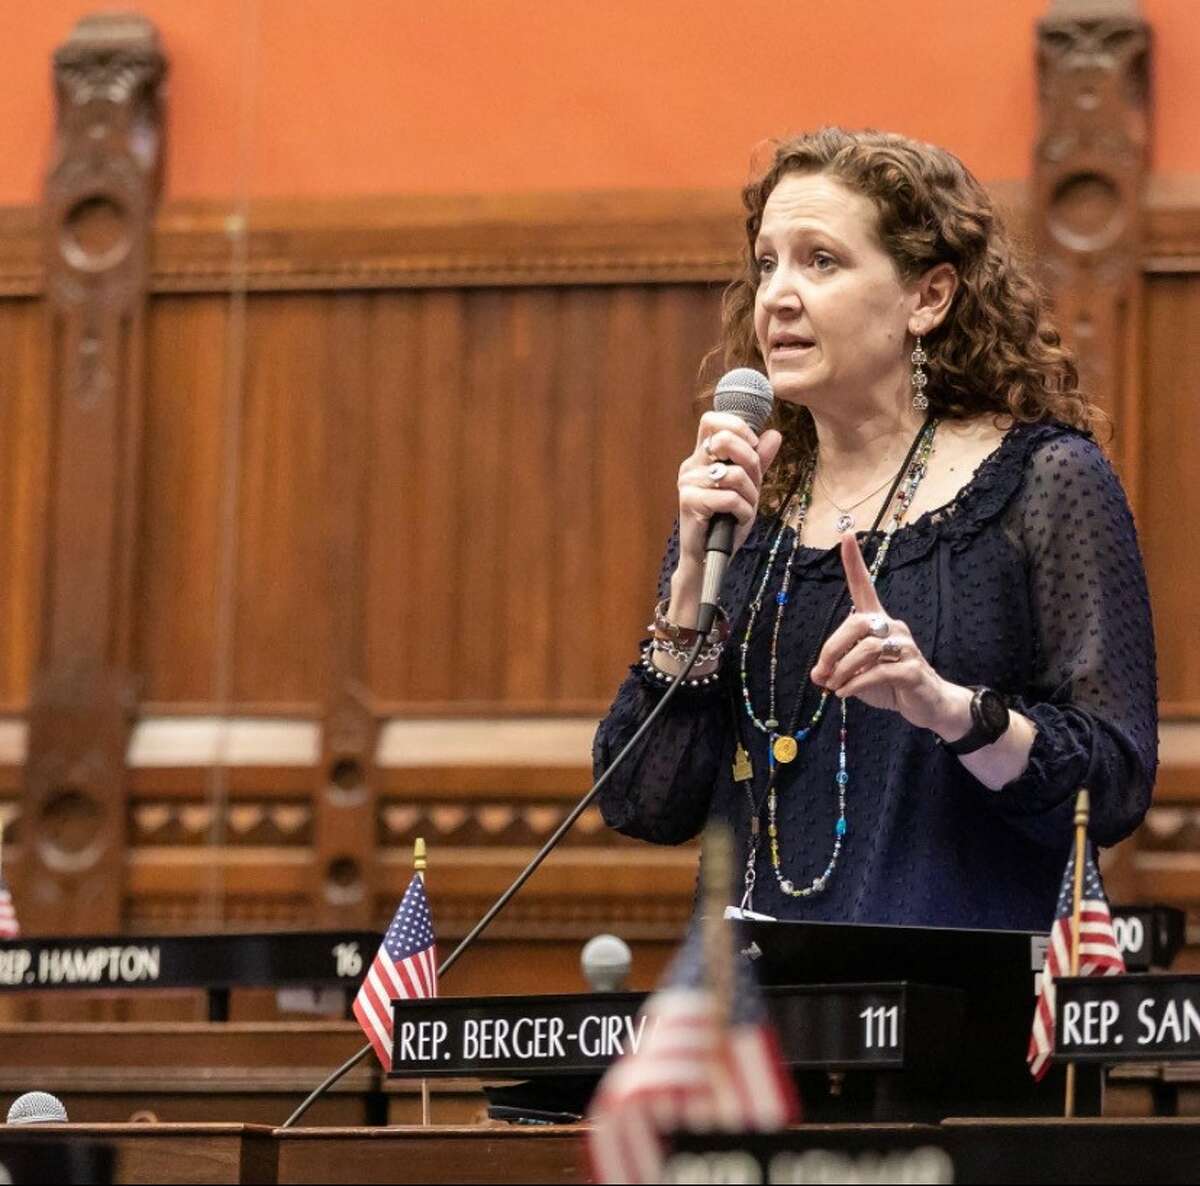 State Rep. Aimee Berger-Girvalo is seeking re-election to the 111th House District against Bob Hebert.